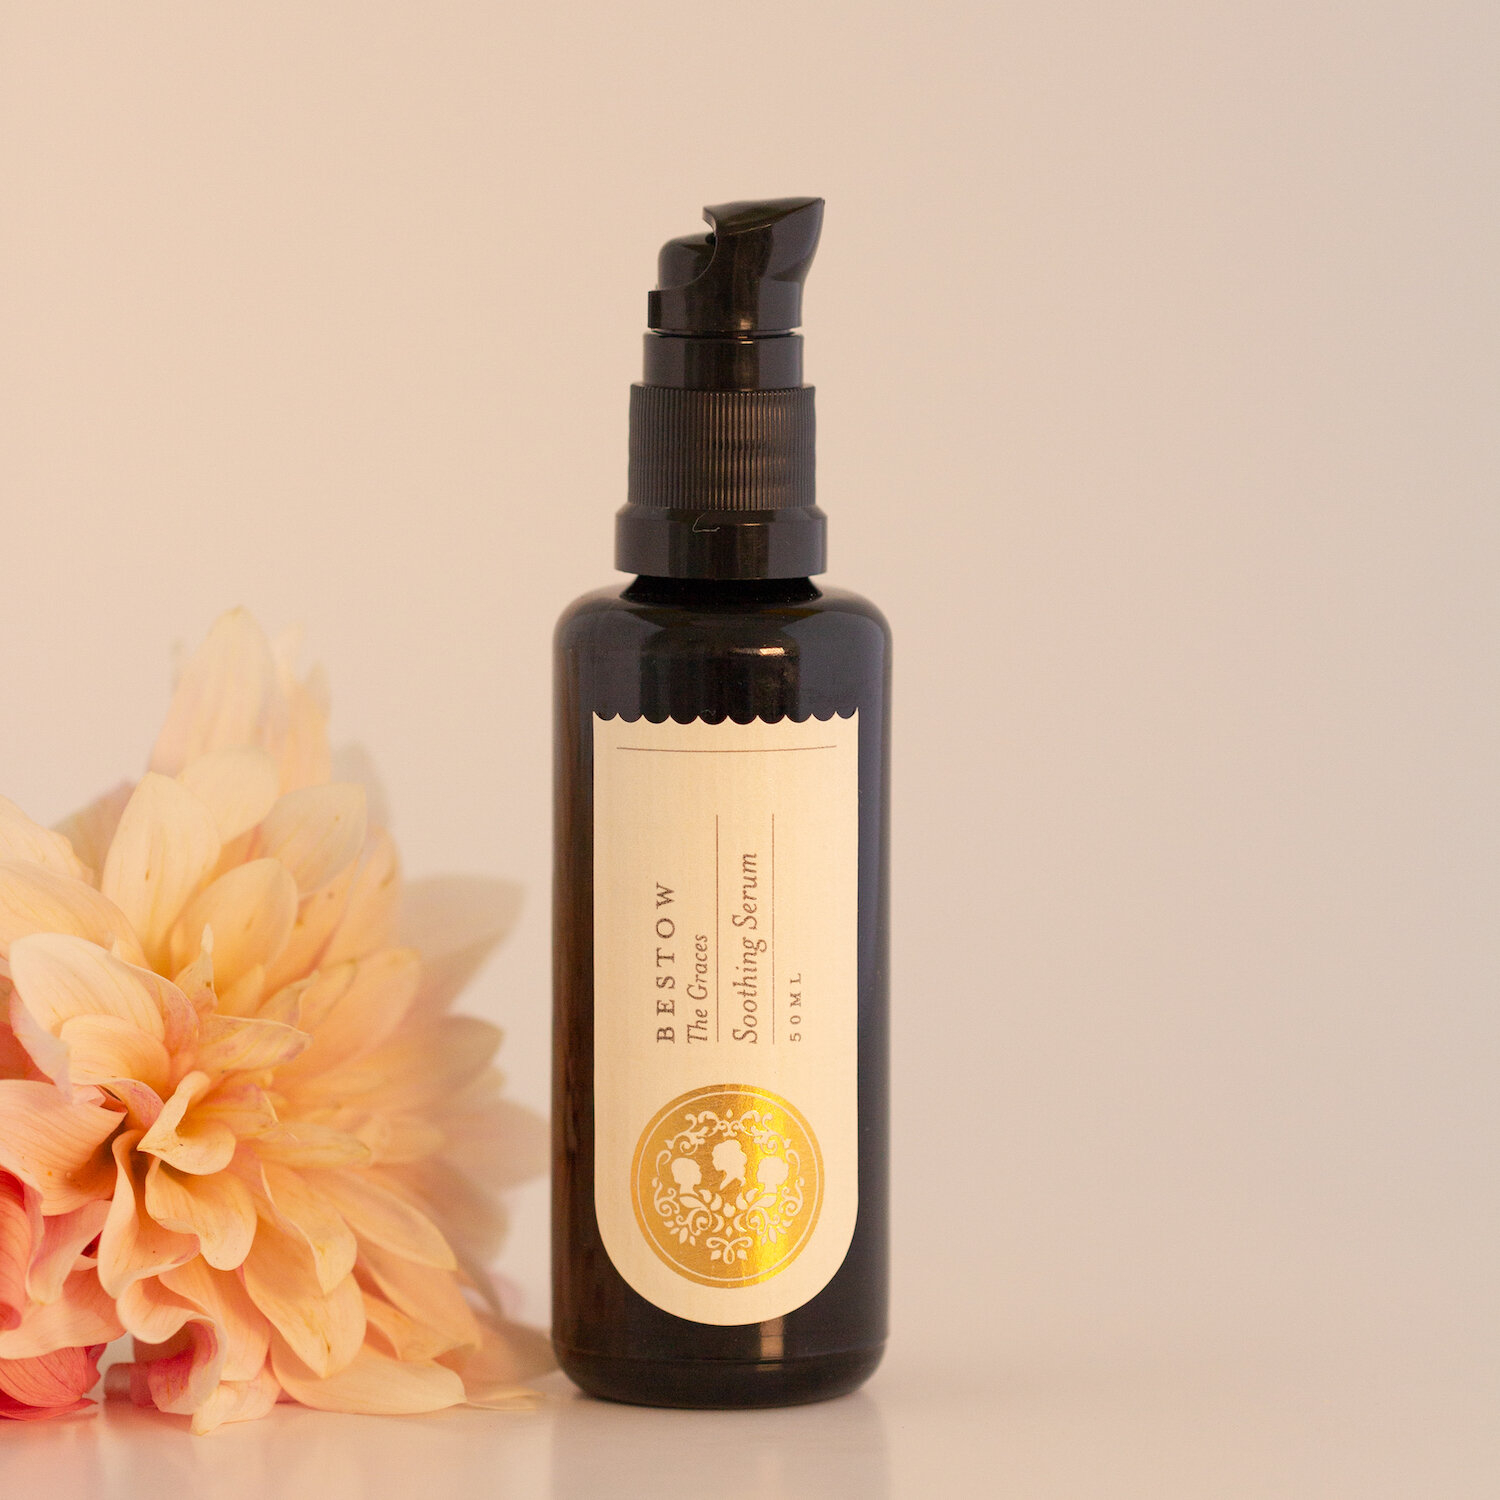 THE GRACES SOOTHING SERUM